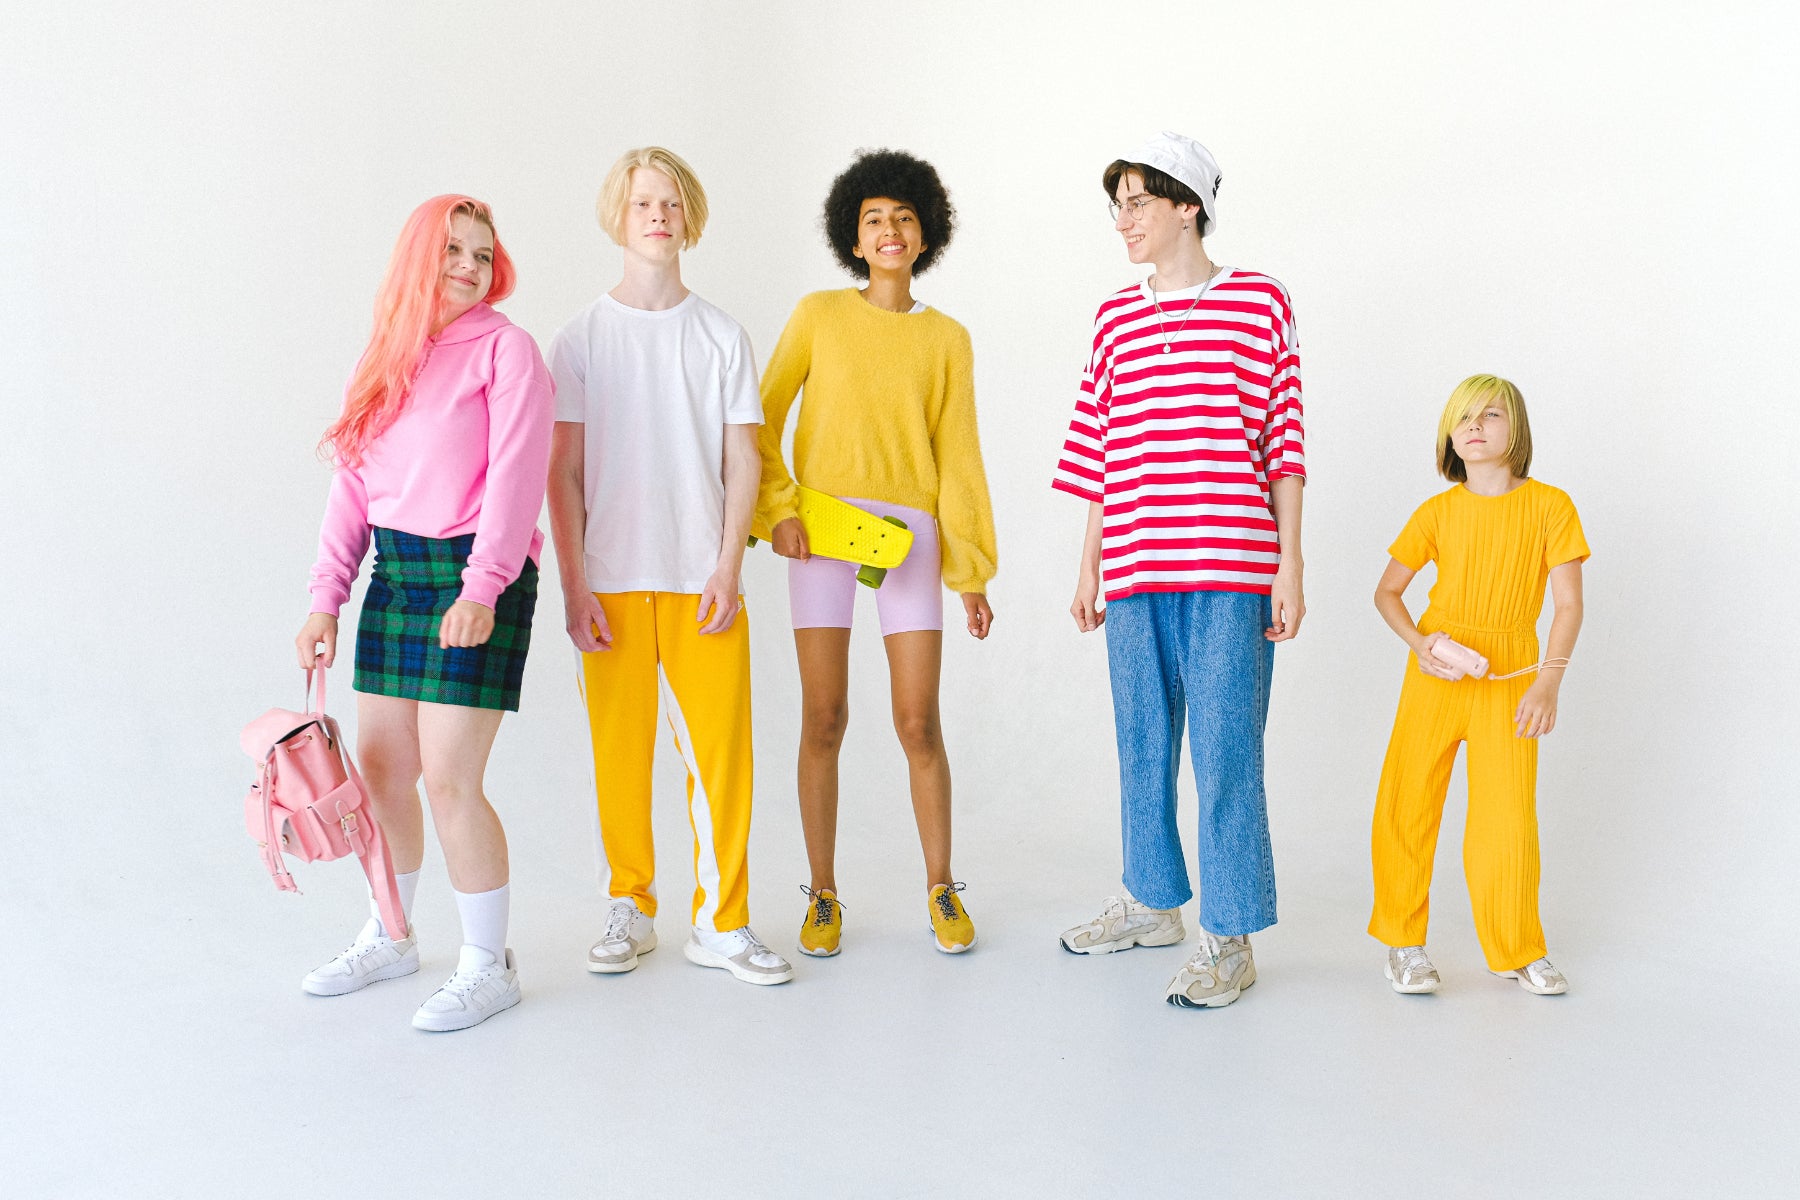 A group of kids and teens stand in a row wearing colorful clothing